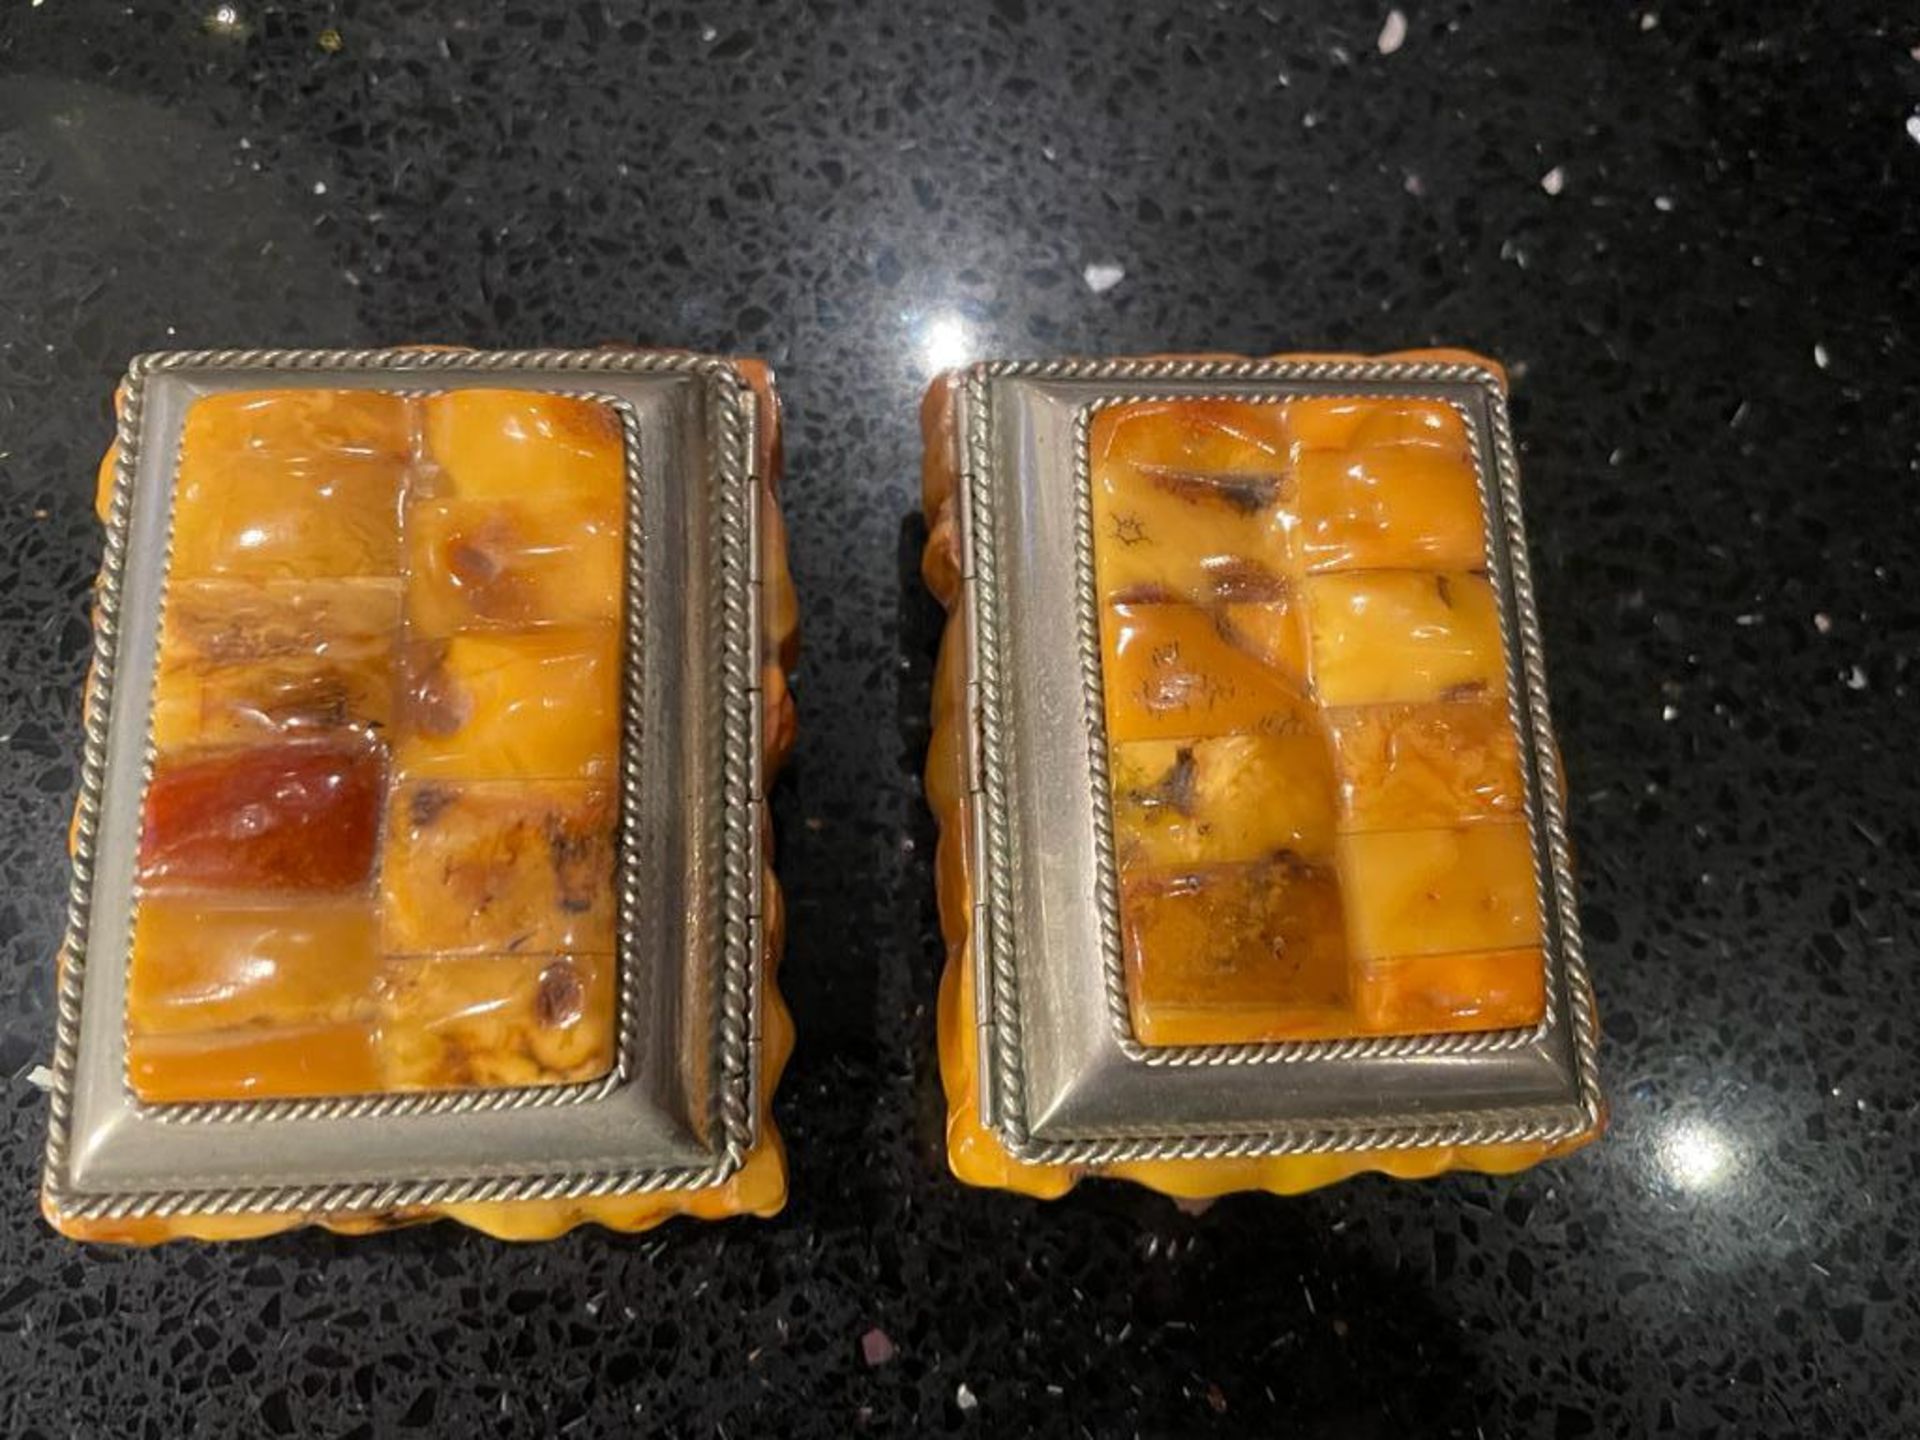 A PAIR OF VINTAGE, BELIEVED YELLOW AMBER, TRINKET BOXES WITH WHITE METAL BORDER AND BASES - Image 2 of 3